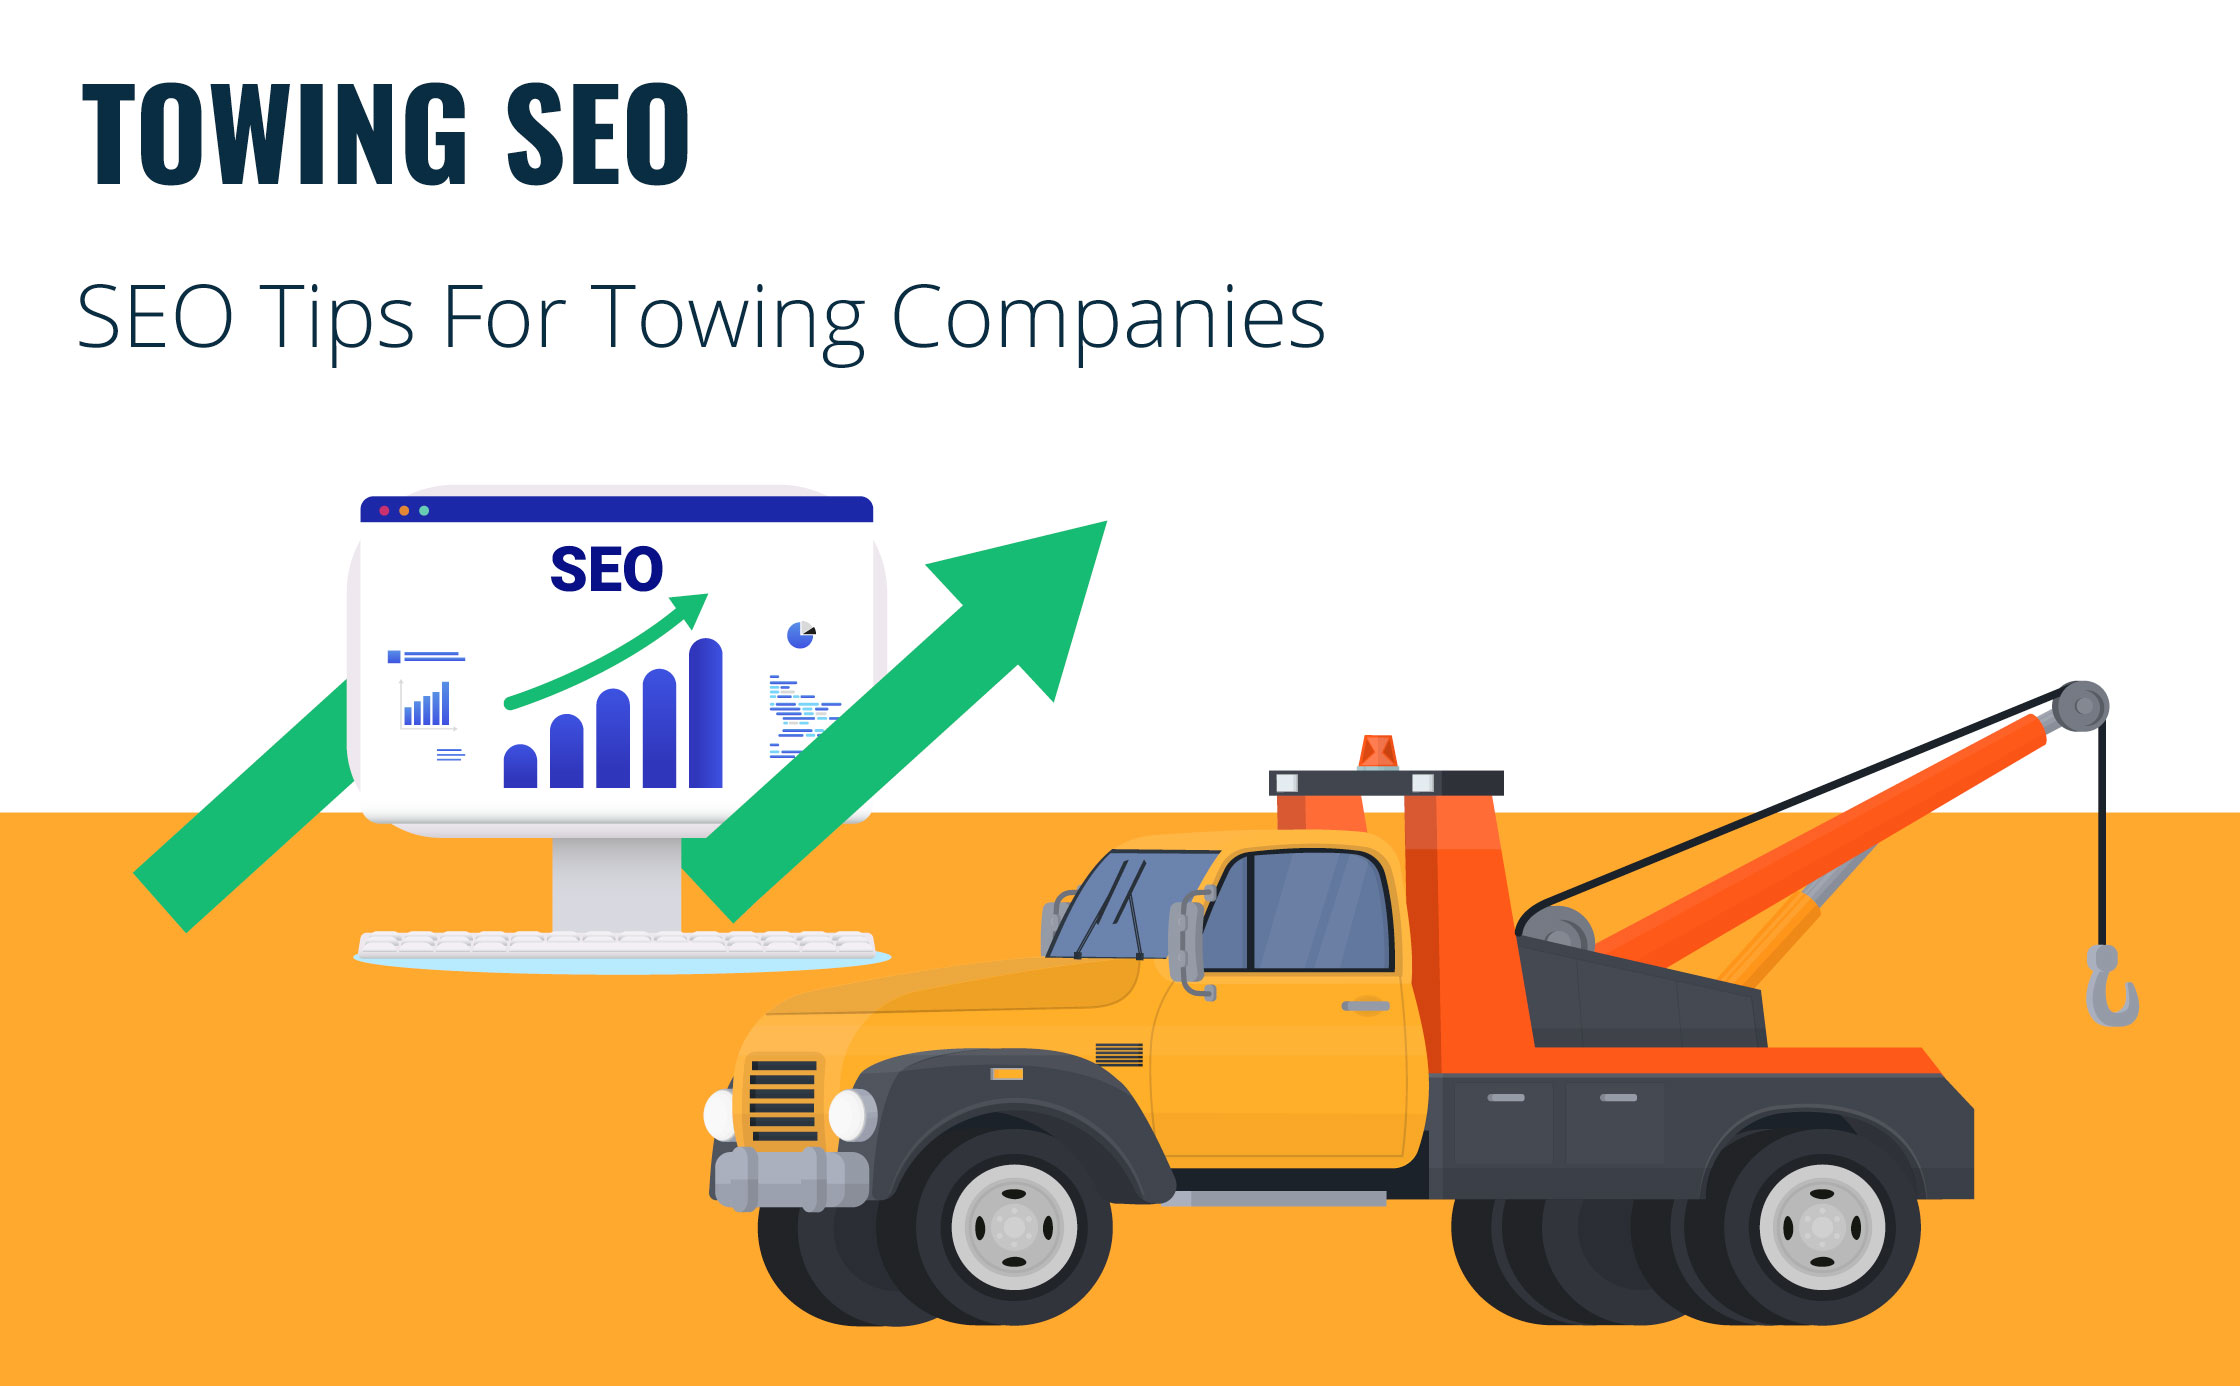 Towing SEO: 8 SEO Tips For Towing Companies